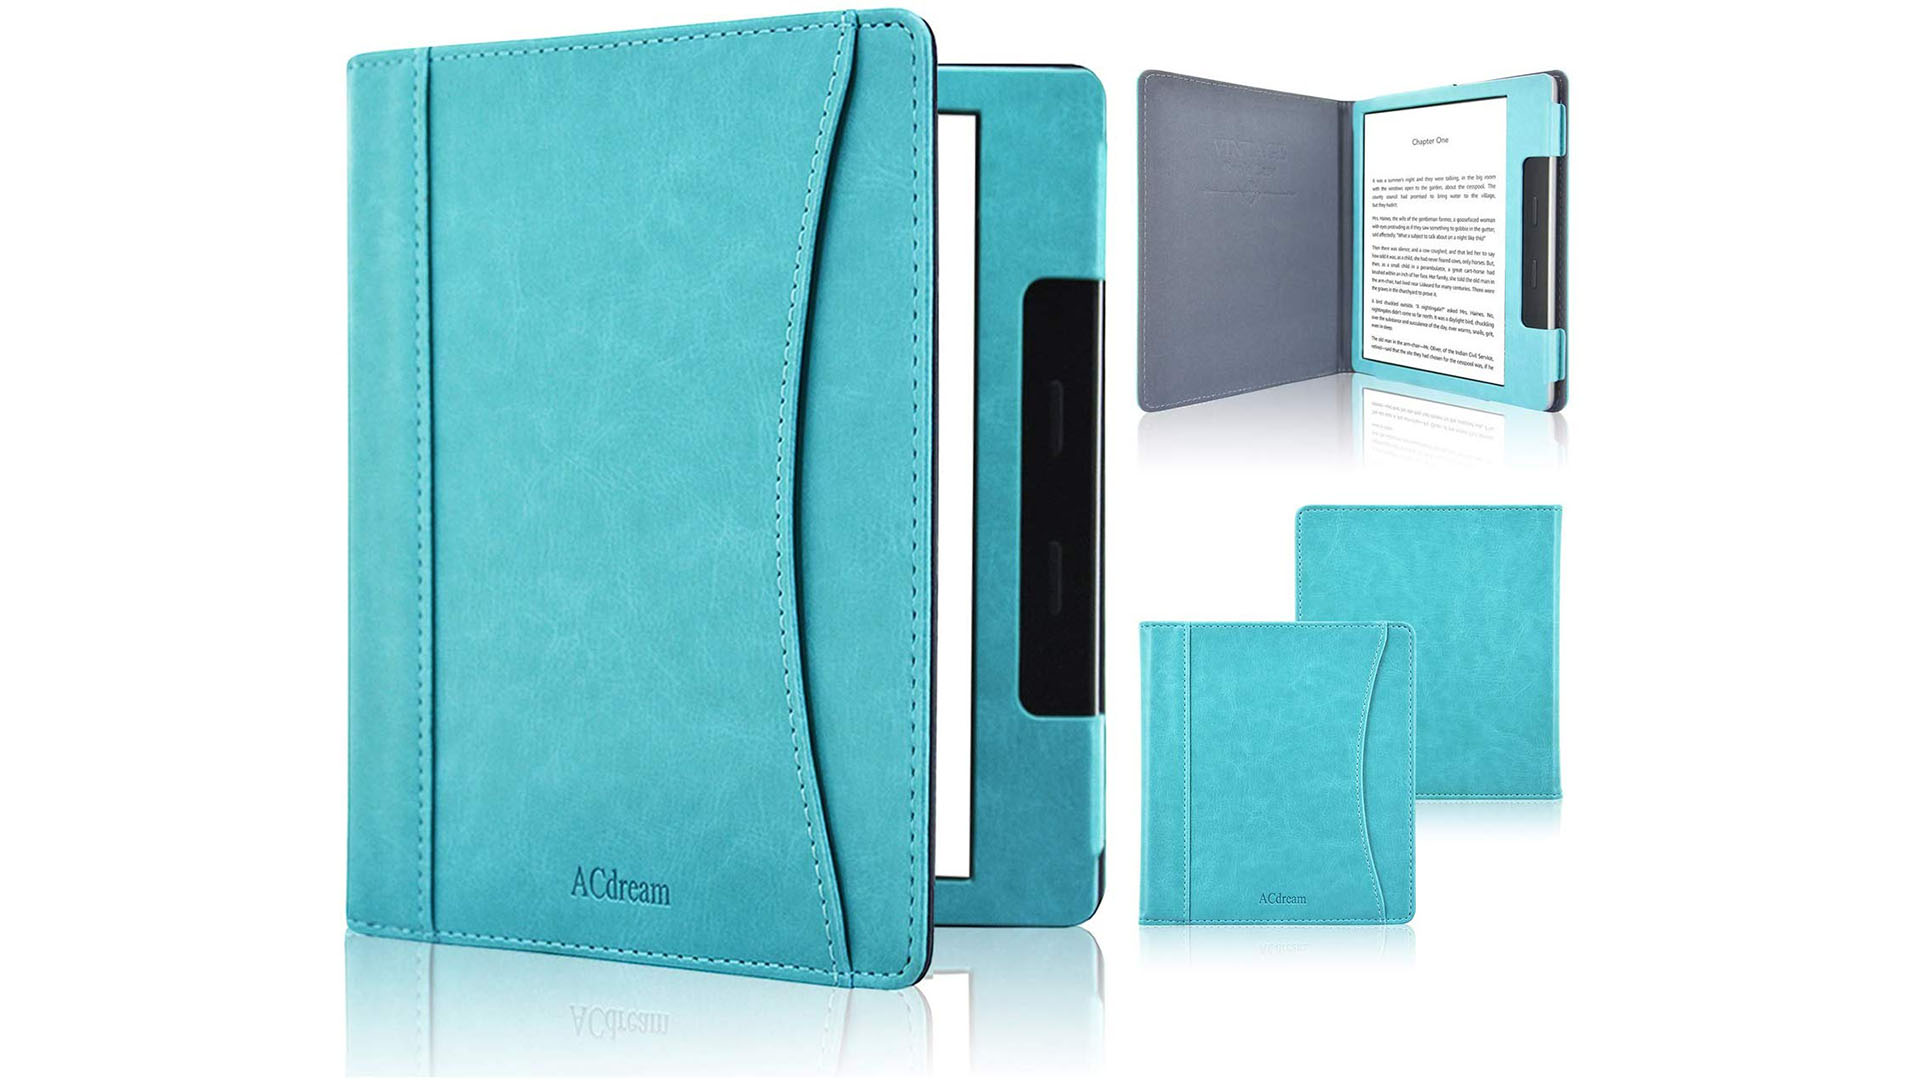 ACdream Kindle case